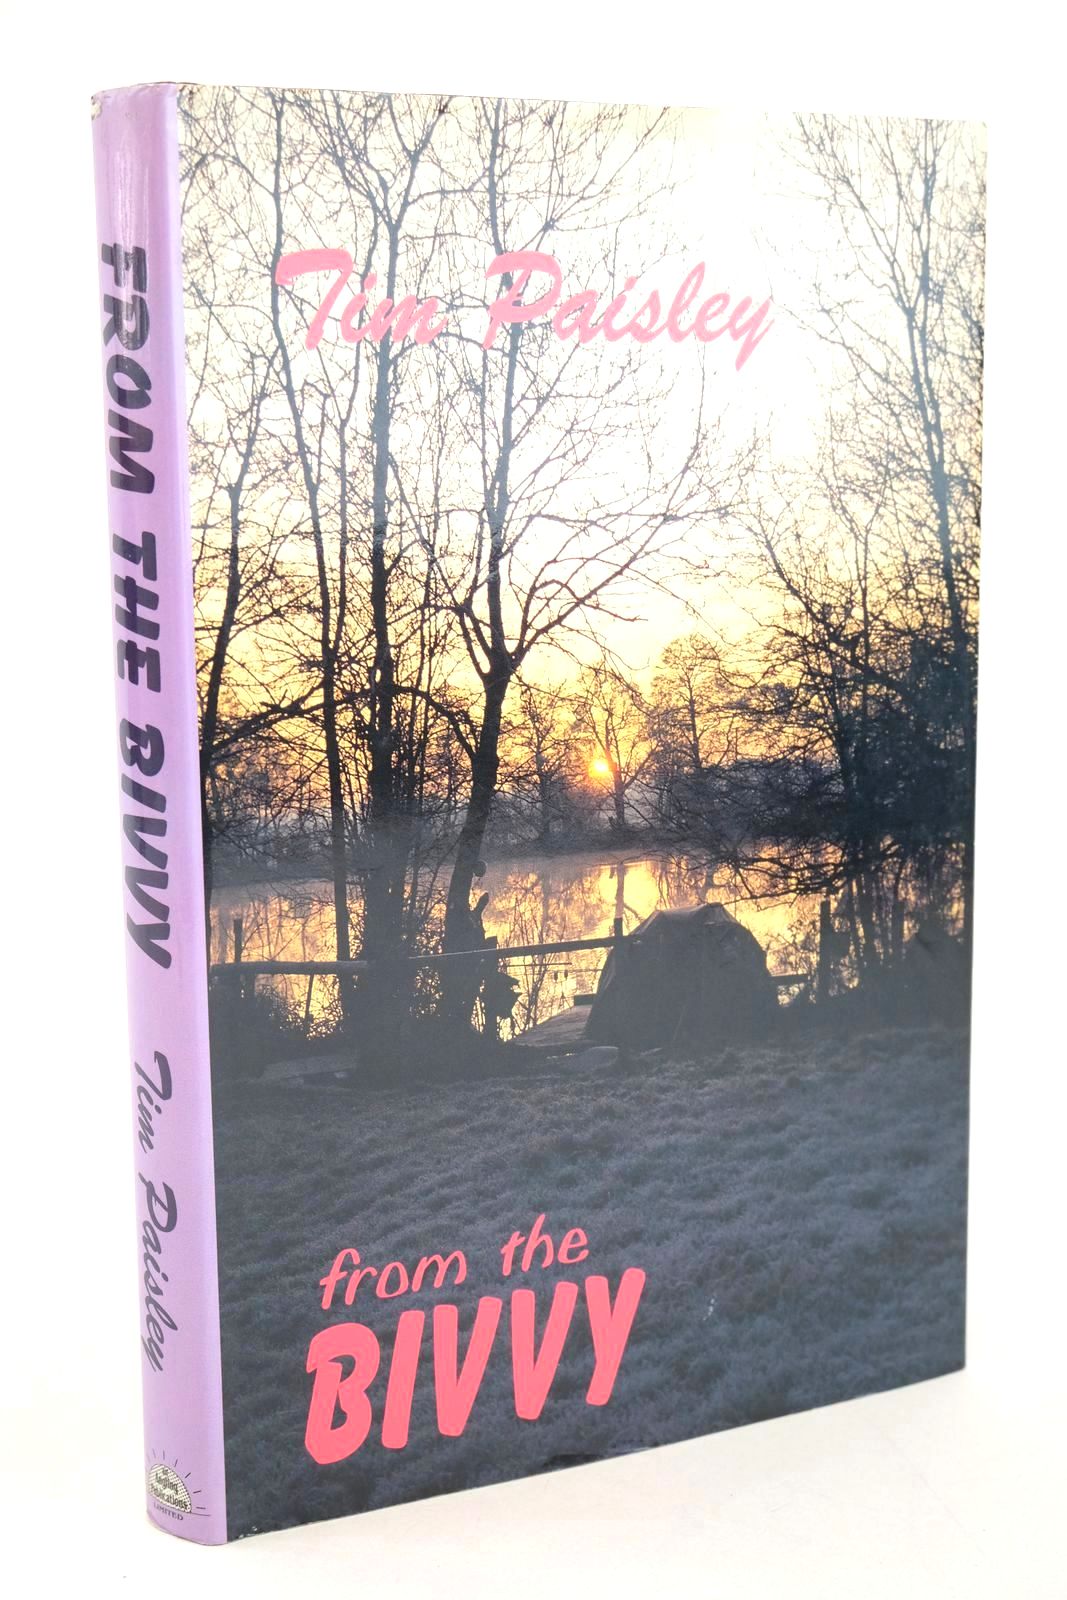 Photo of FROM THE BIVVY written by Paisley, Tim published by Angling Publications (STOCK CODE: 1327675)  for sale by Stella & Rose's Books